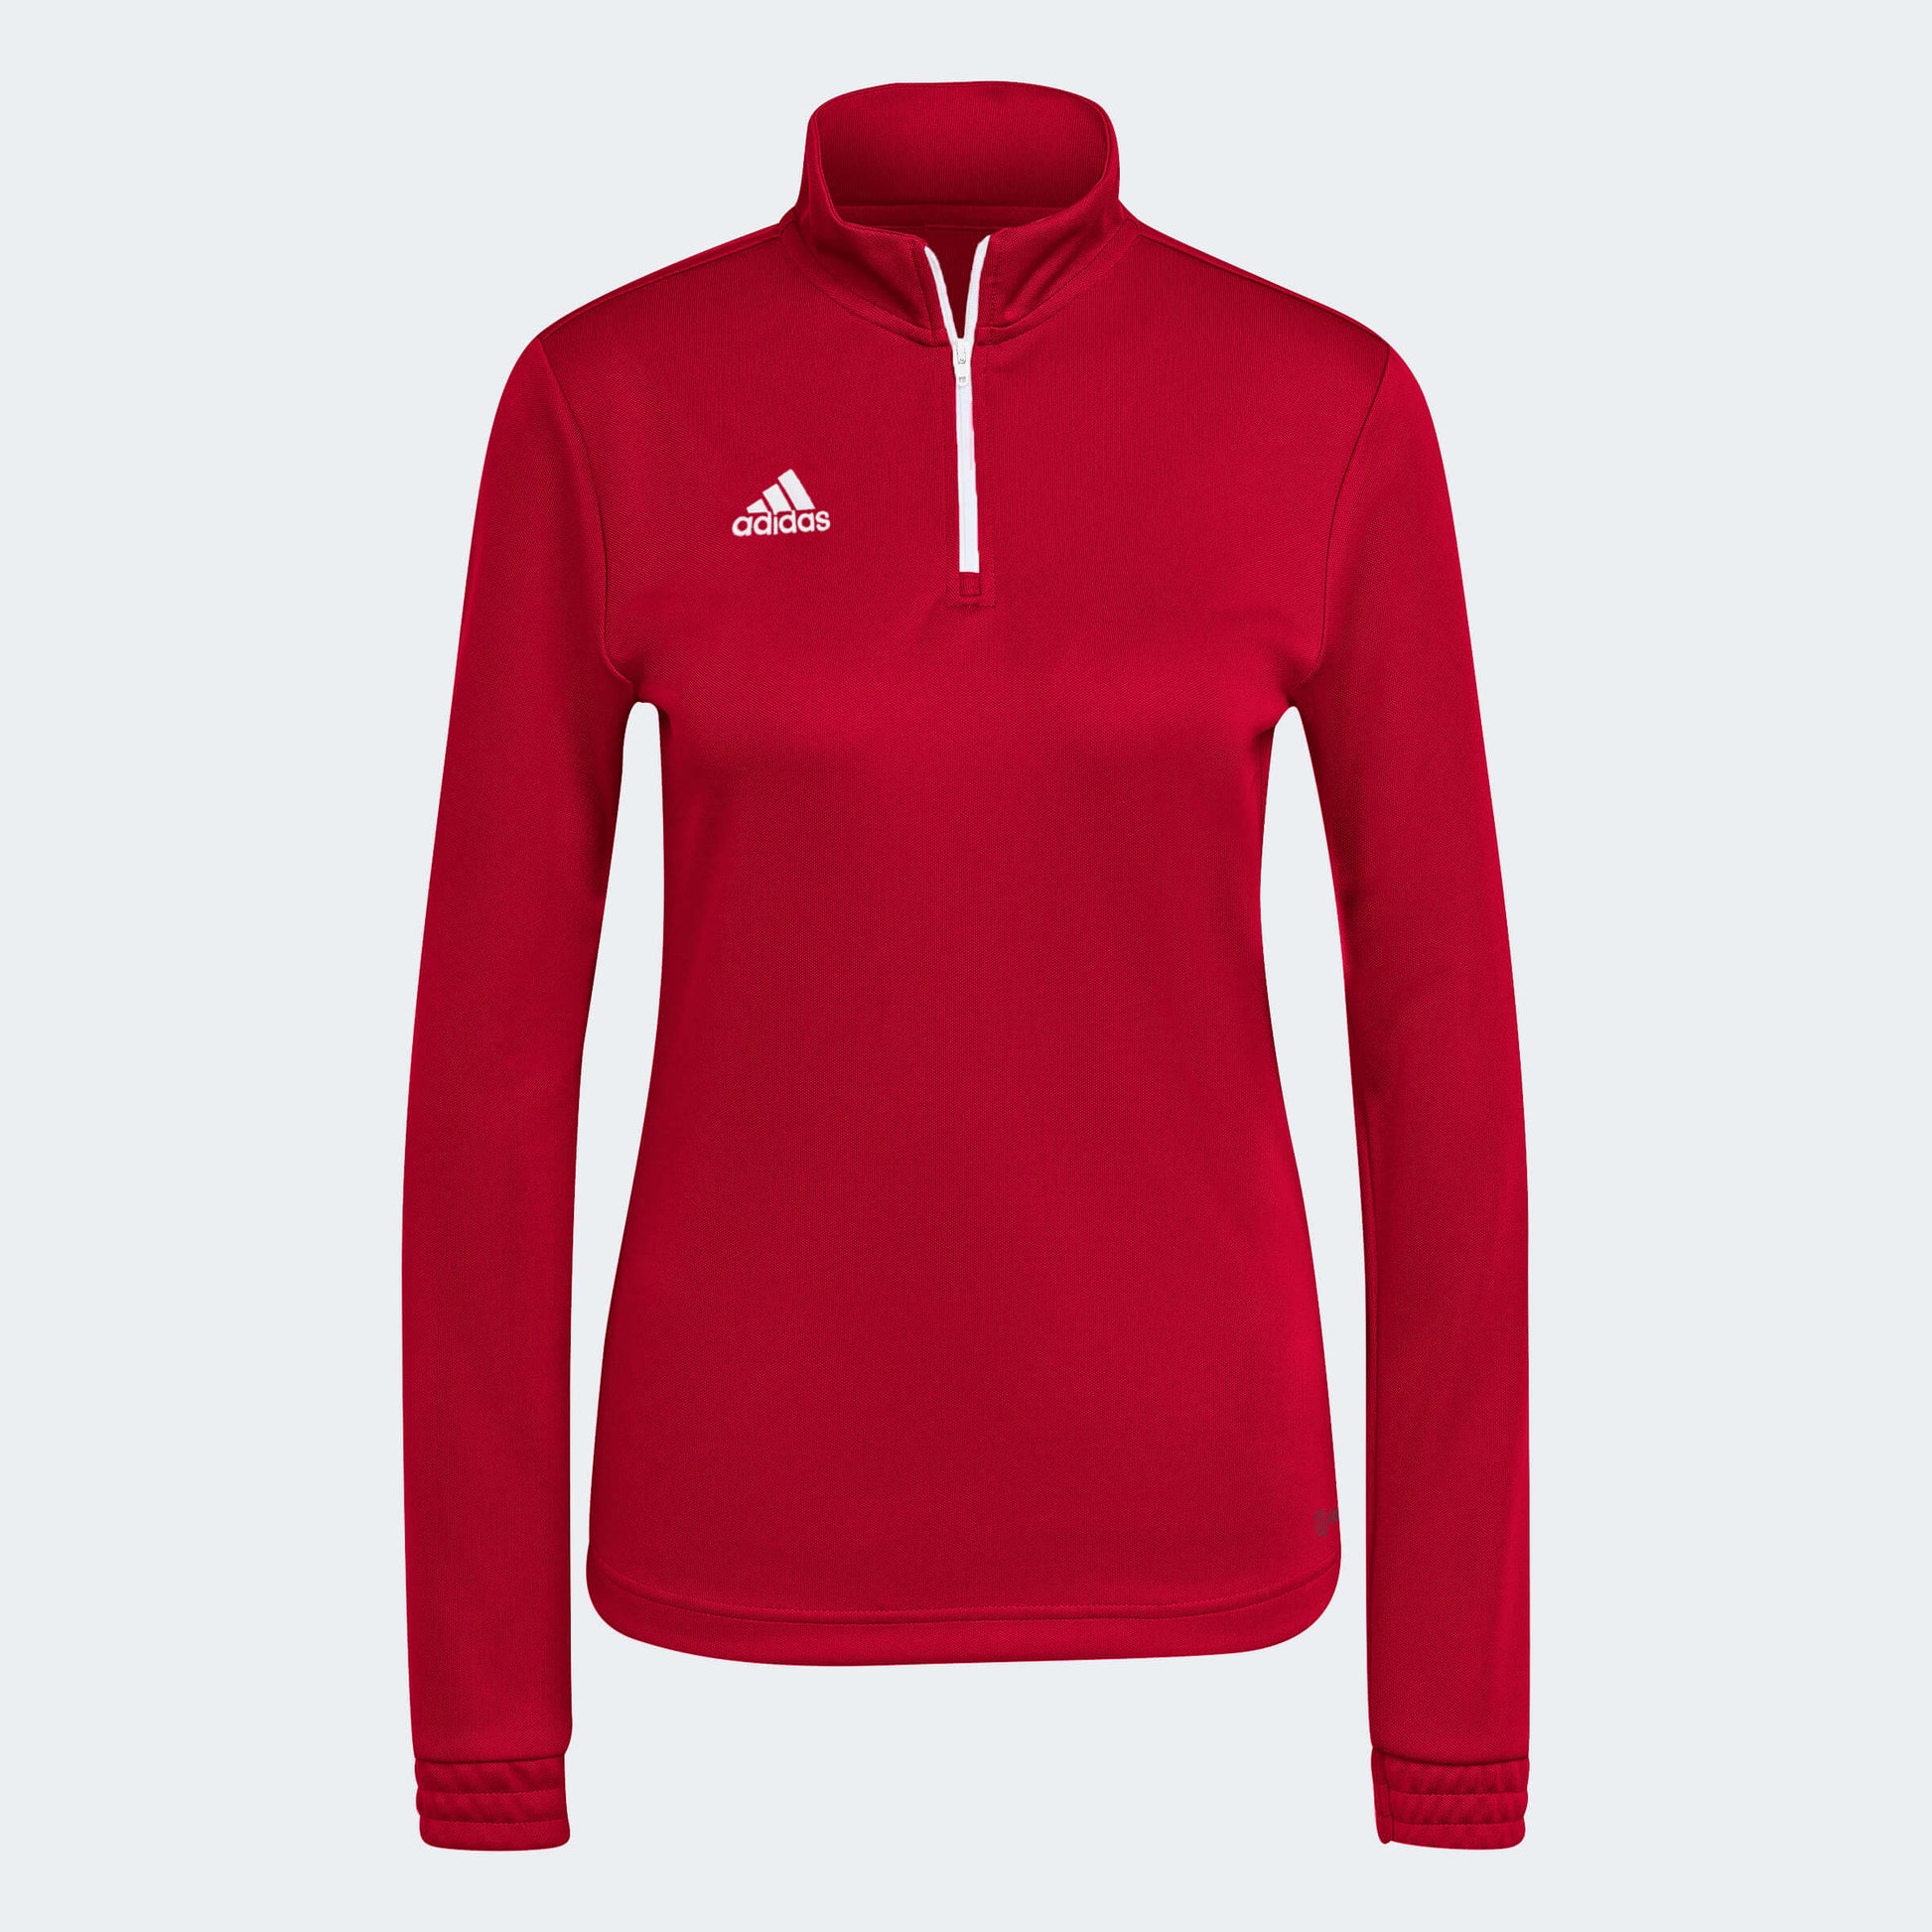 adidas WOMEN Entrada 22 Training Top Red-White (Front)